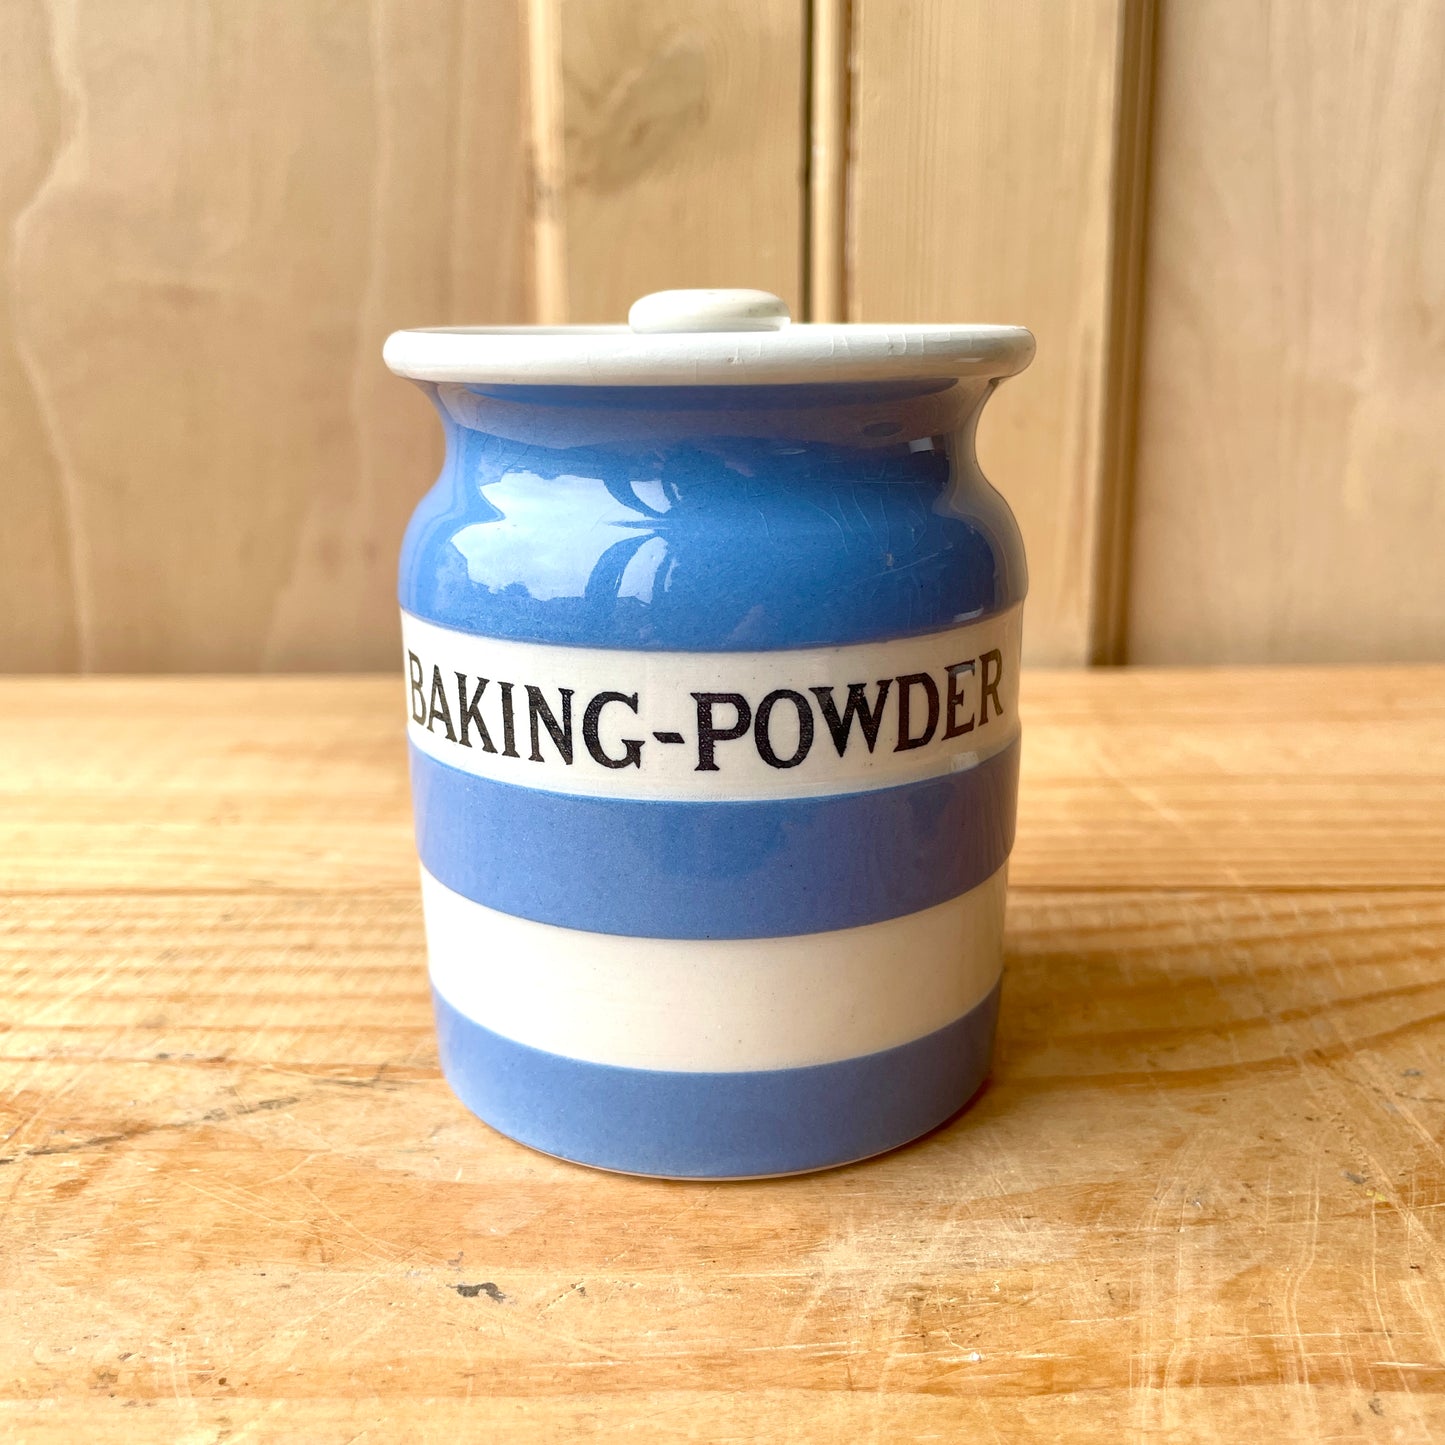 TG Green Blue and Baking Powder Canister